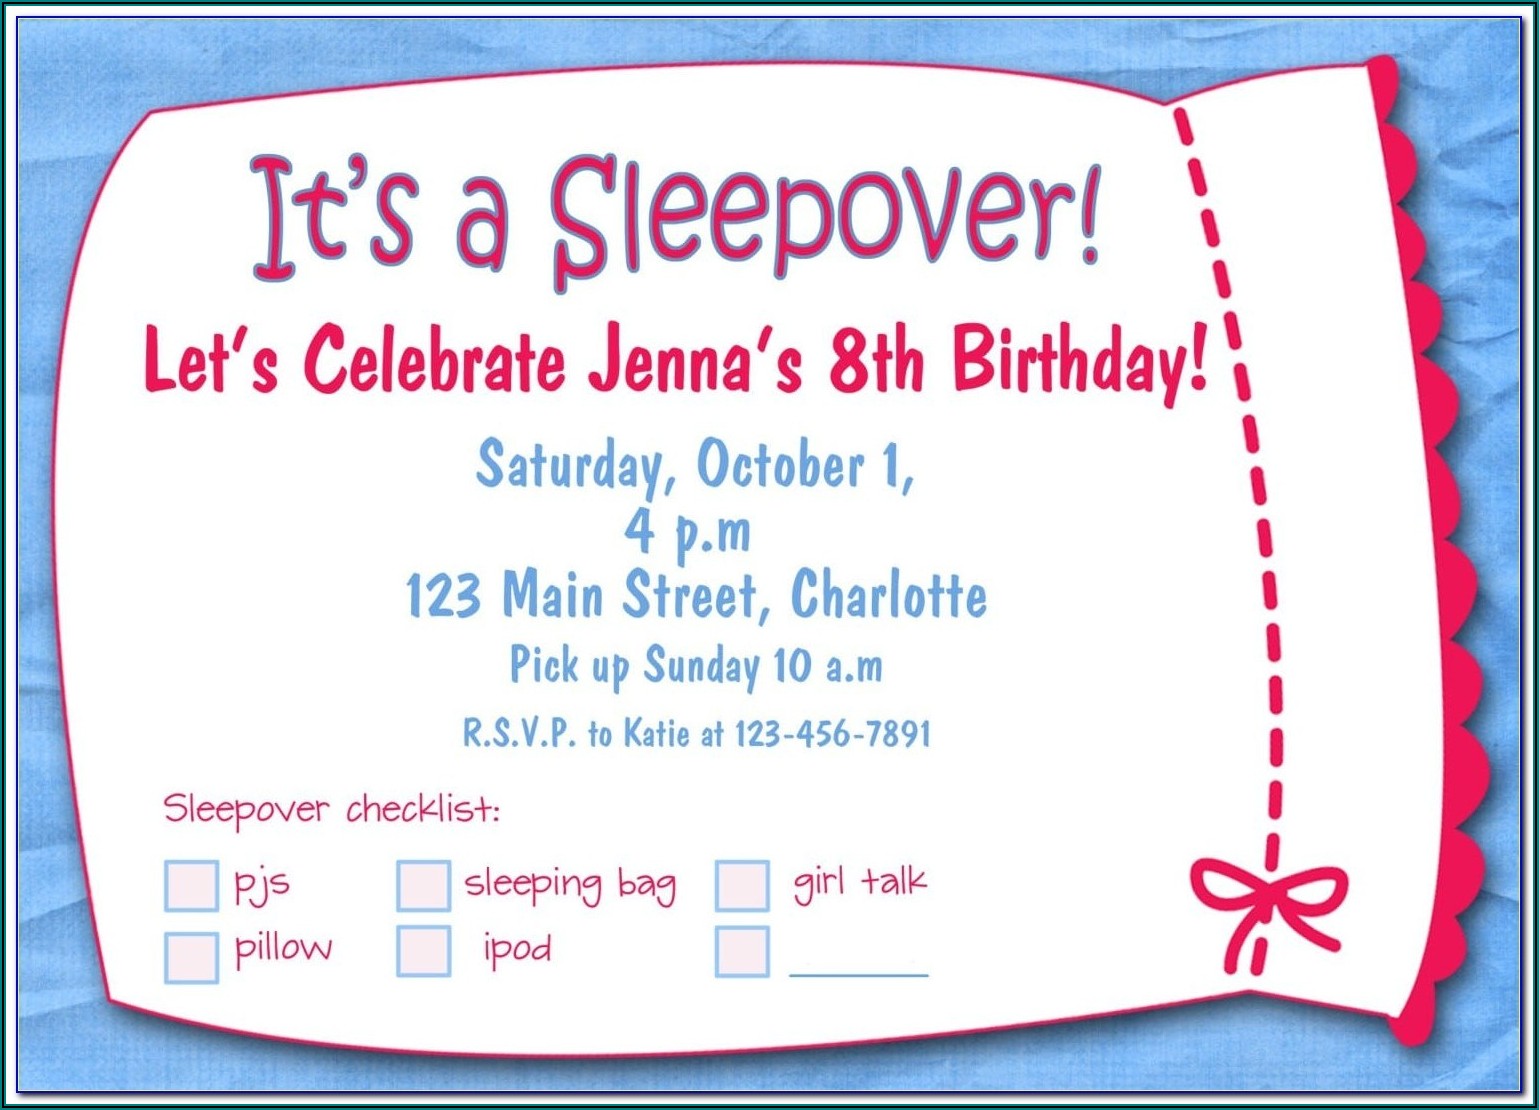 Free Party Invitation Templates Online